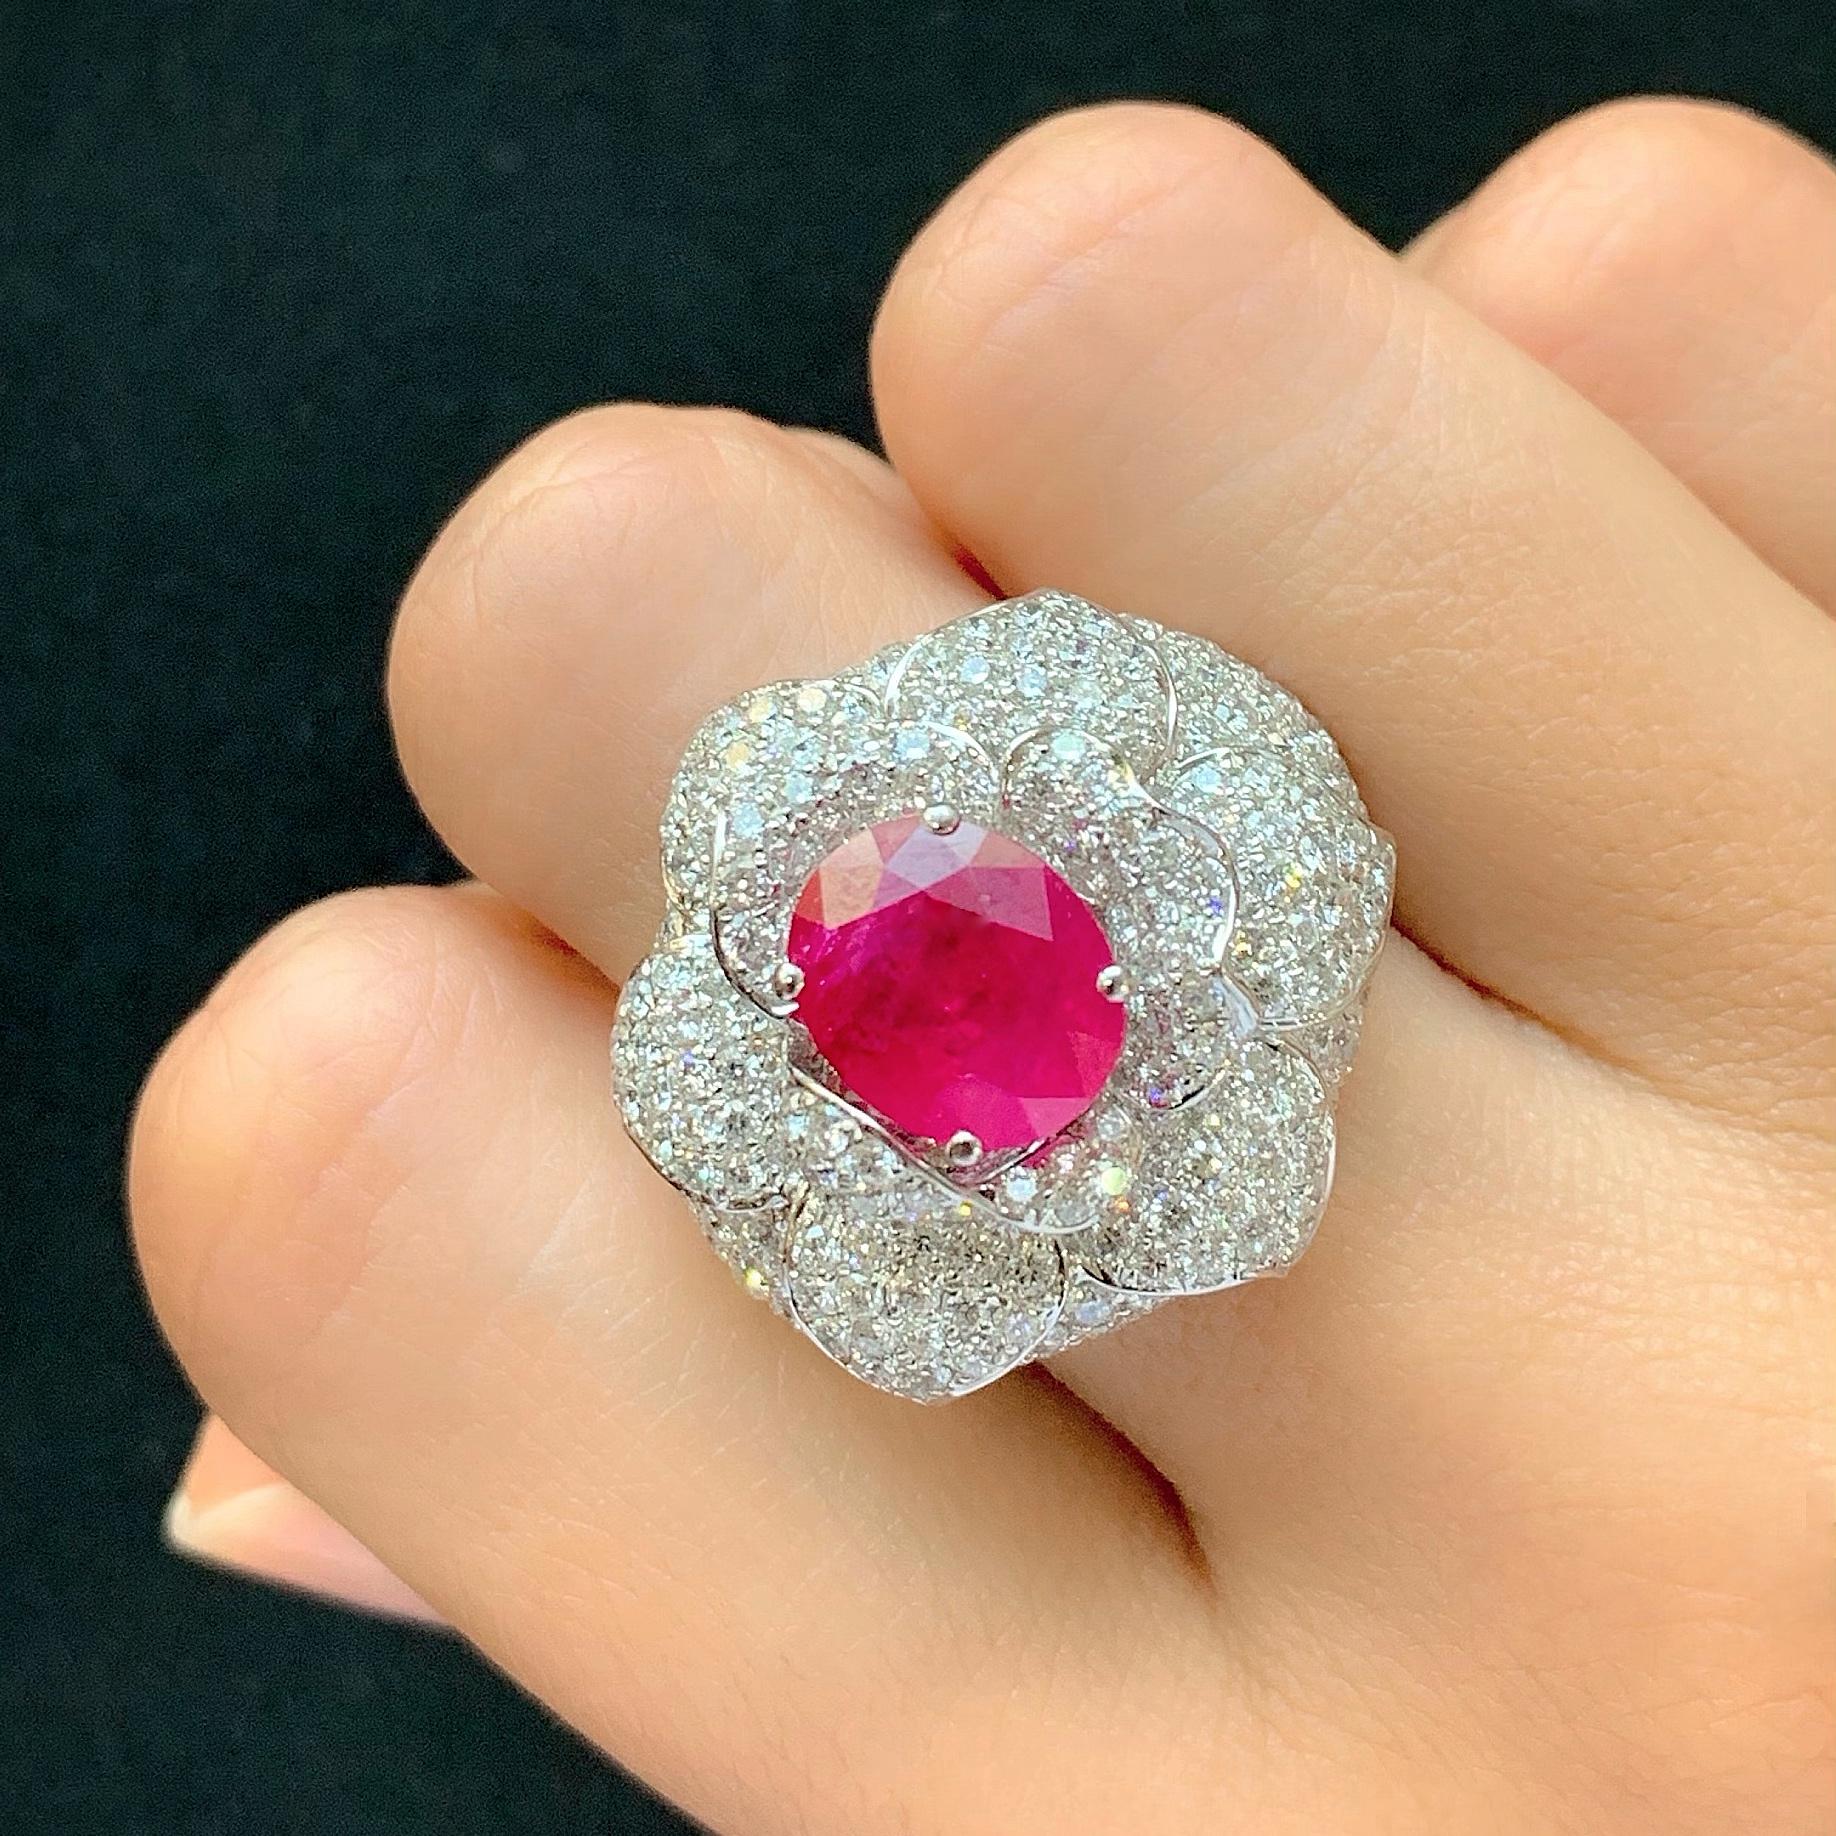 Contemporary Certified 3.71 Carat Oval Ruby Diamond 18 Karat White Gold Cocktail Ring For Sale